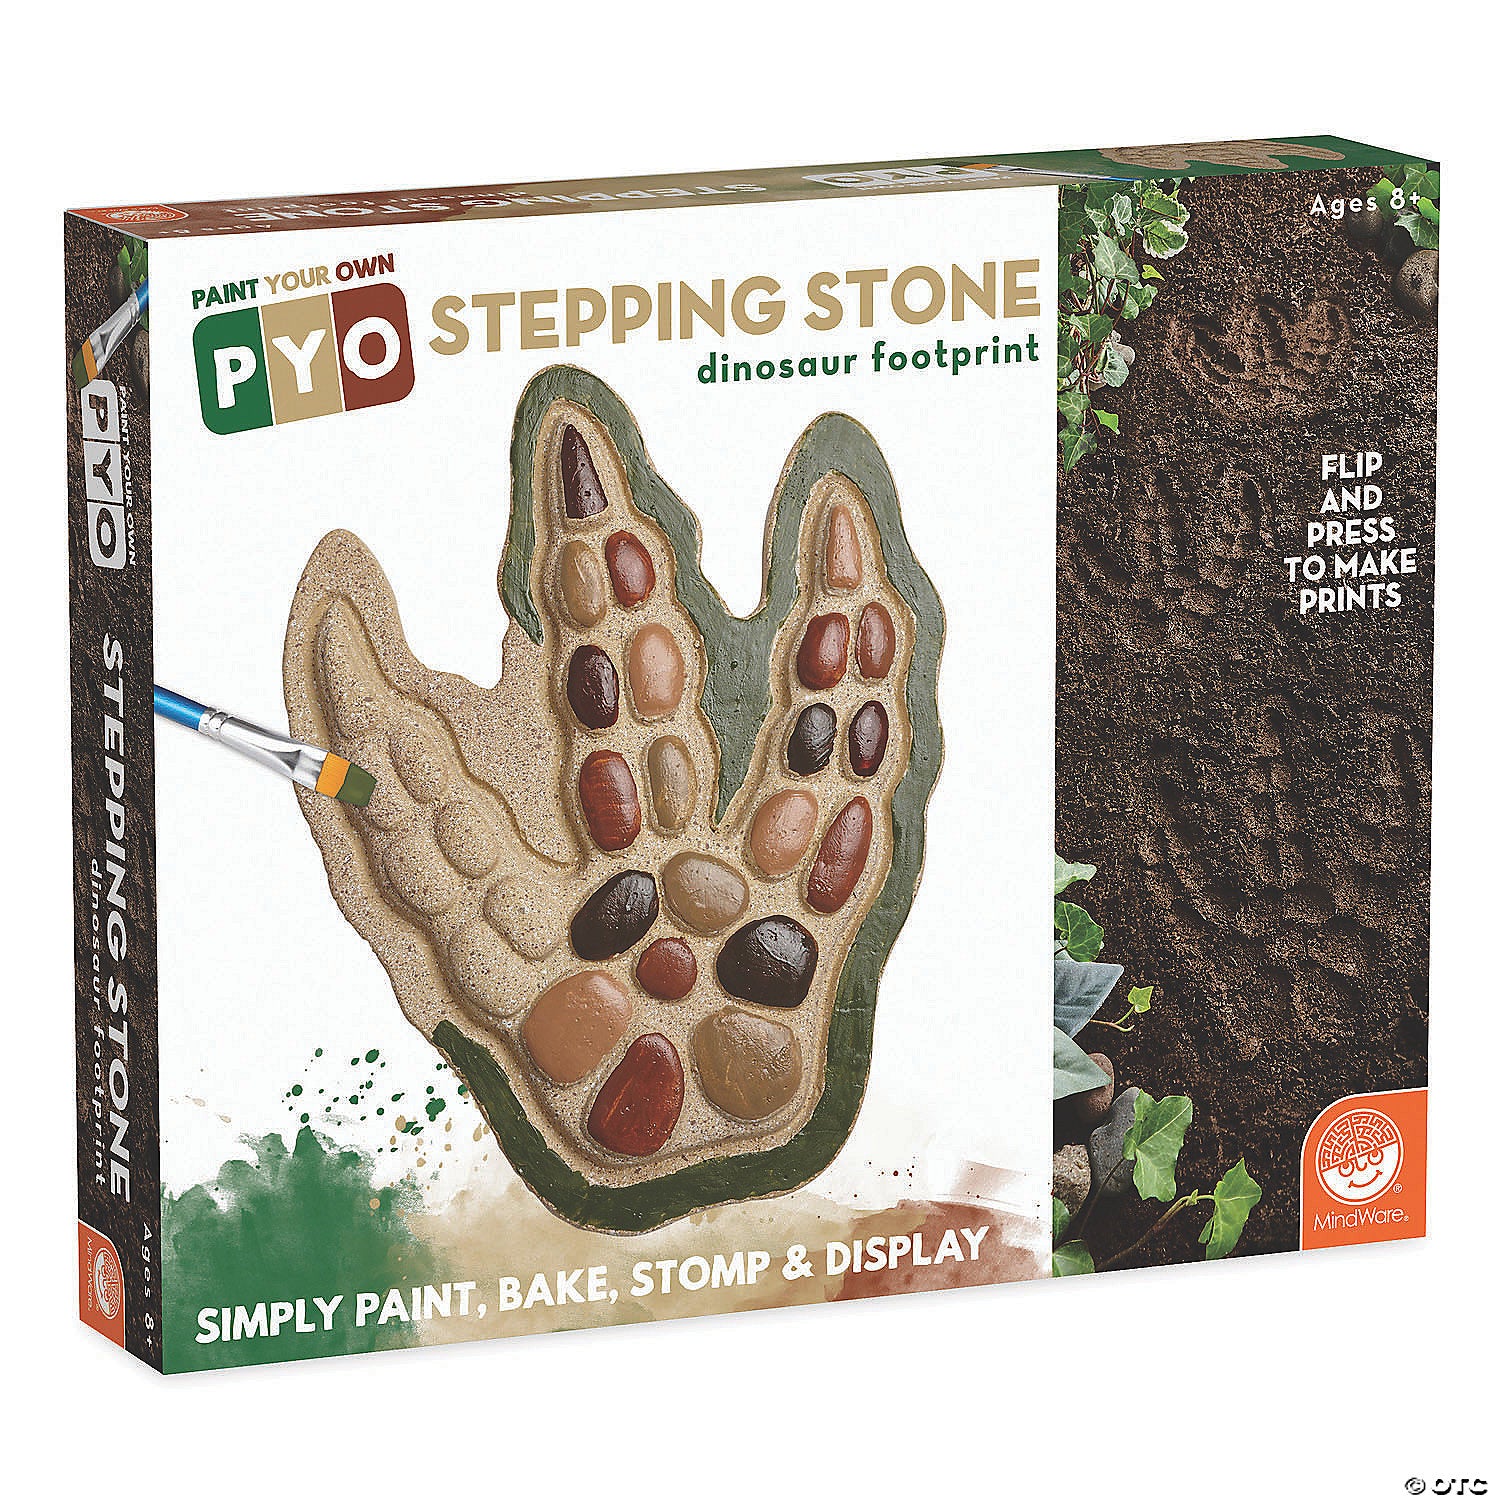 Paint Your Own Stepping Stone Dinosaur Footprint